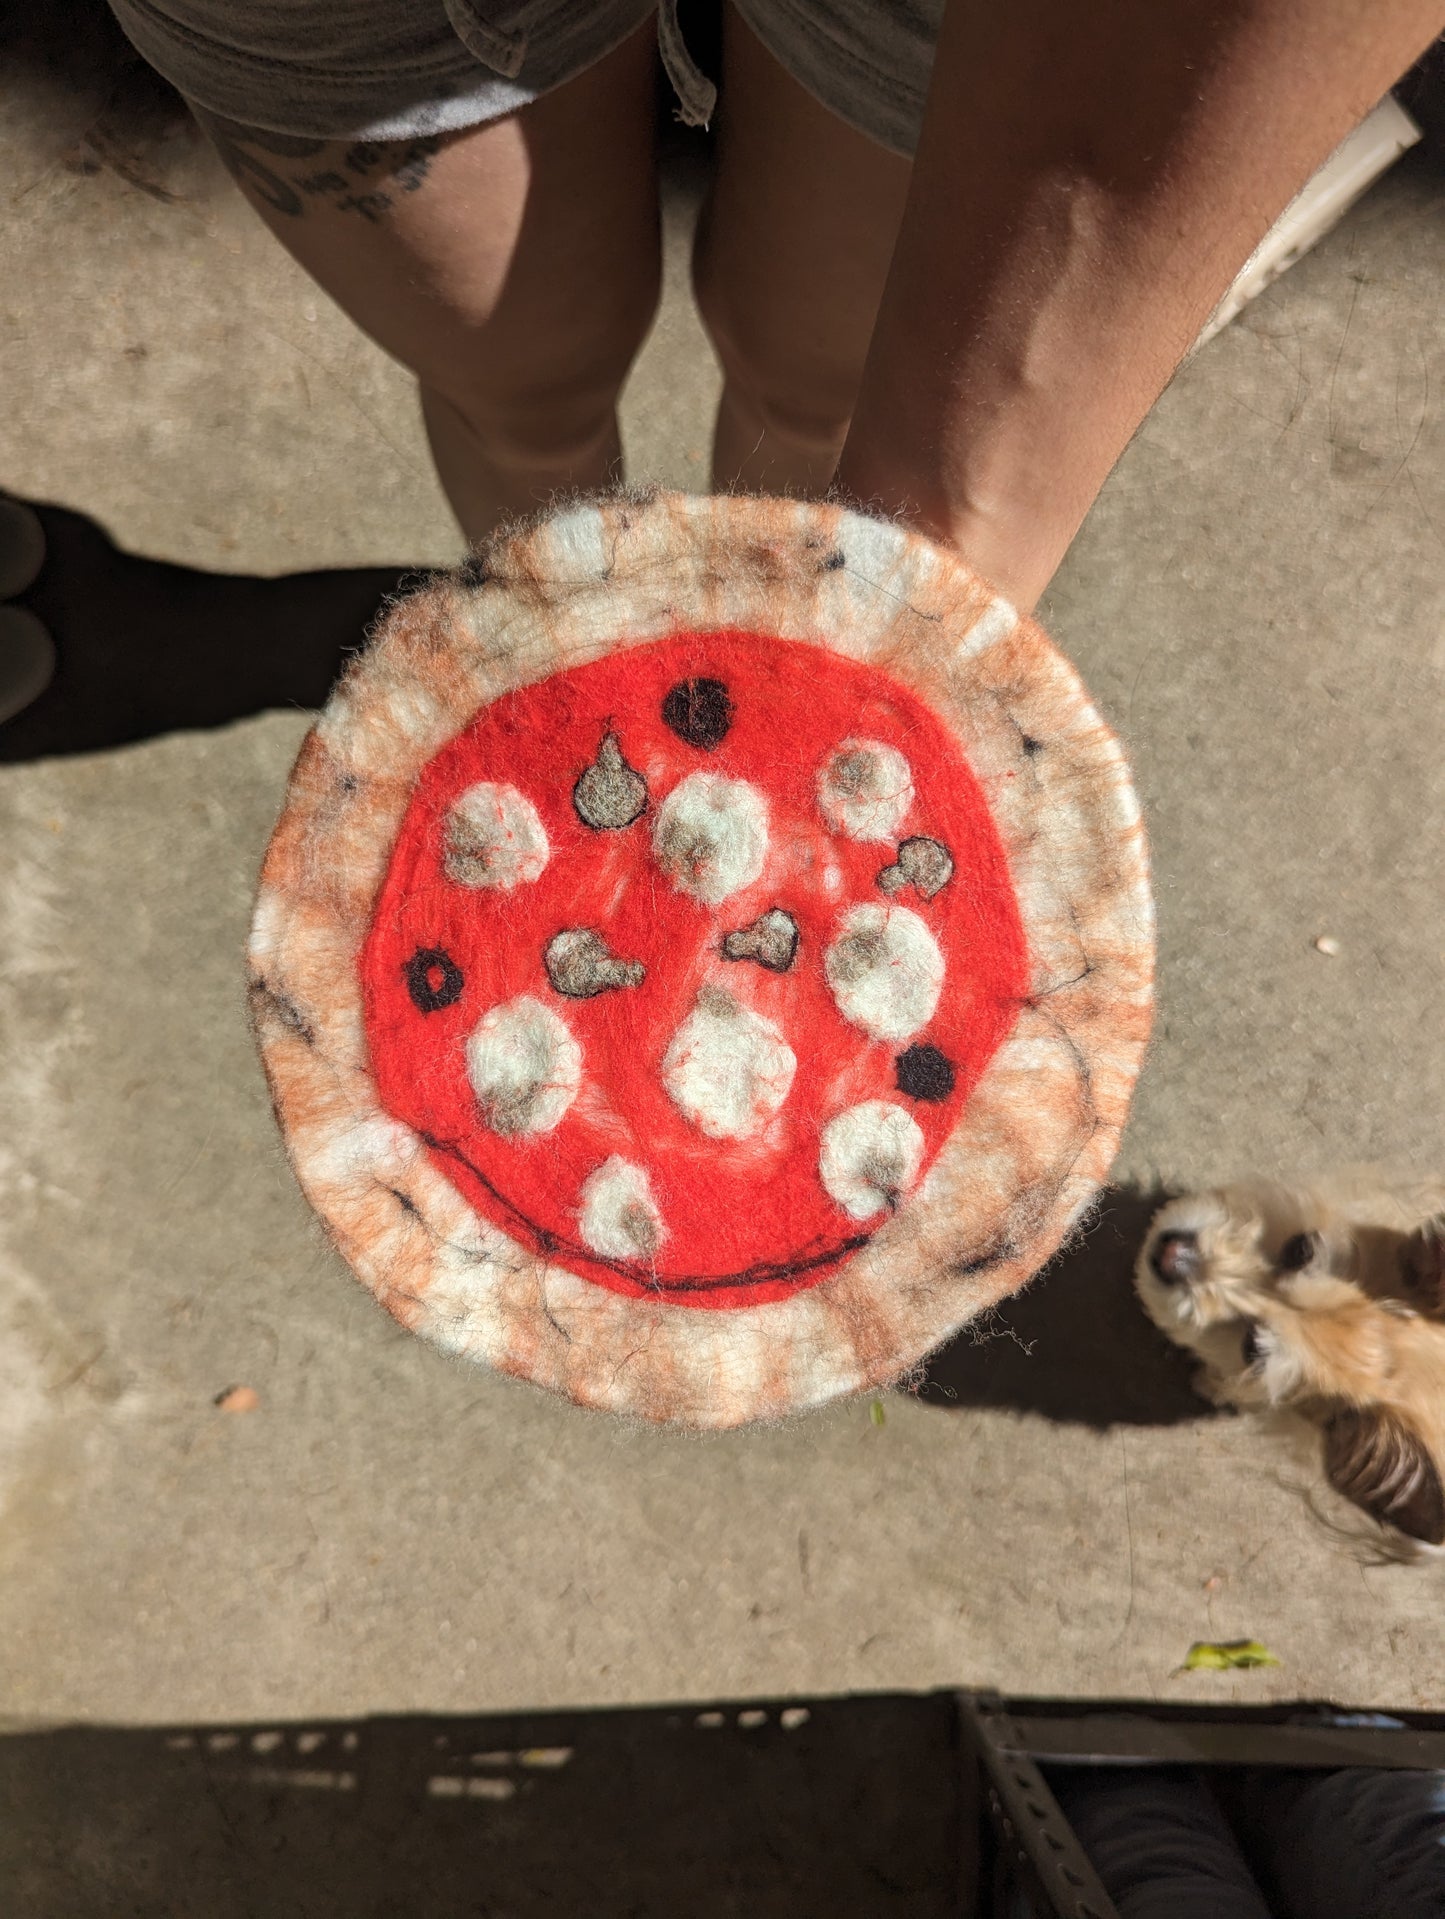 Pizza Felting Class at the Secret Spot - DATE MOVED to 4/27 due to weather